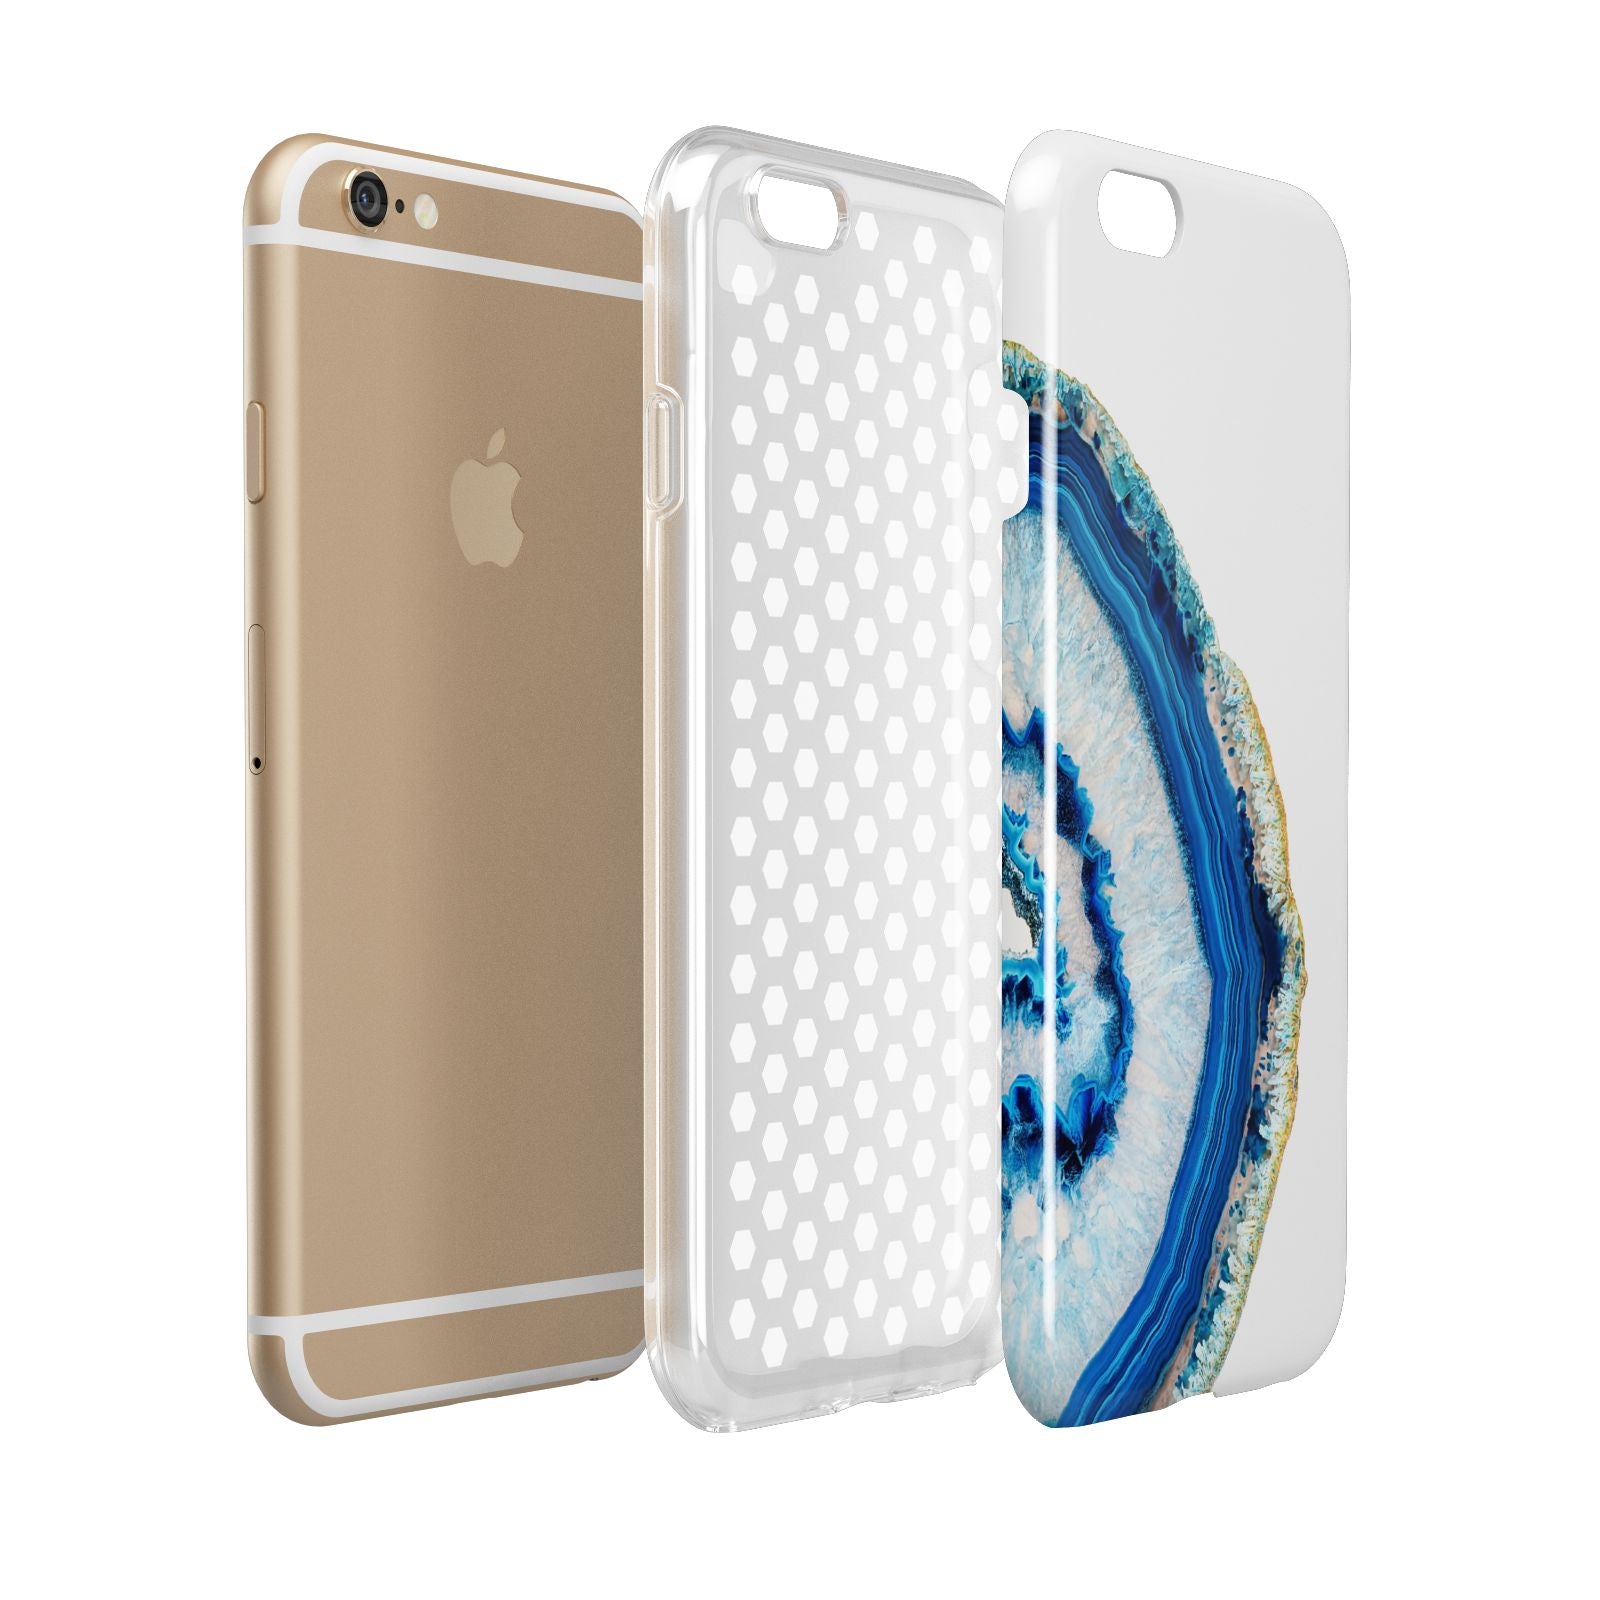 Agate Dark Blue and Turquoise Apple iPhone 6 3D Tough Case Expanded view